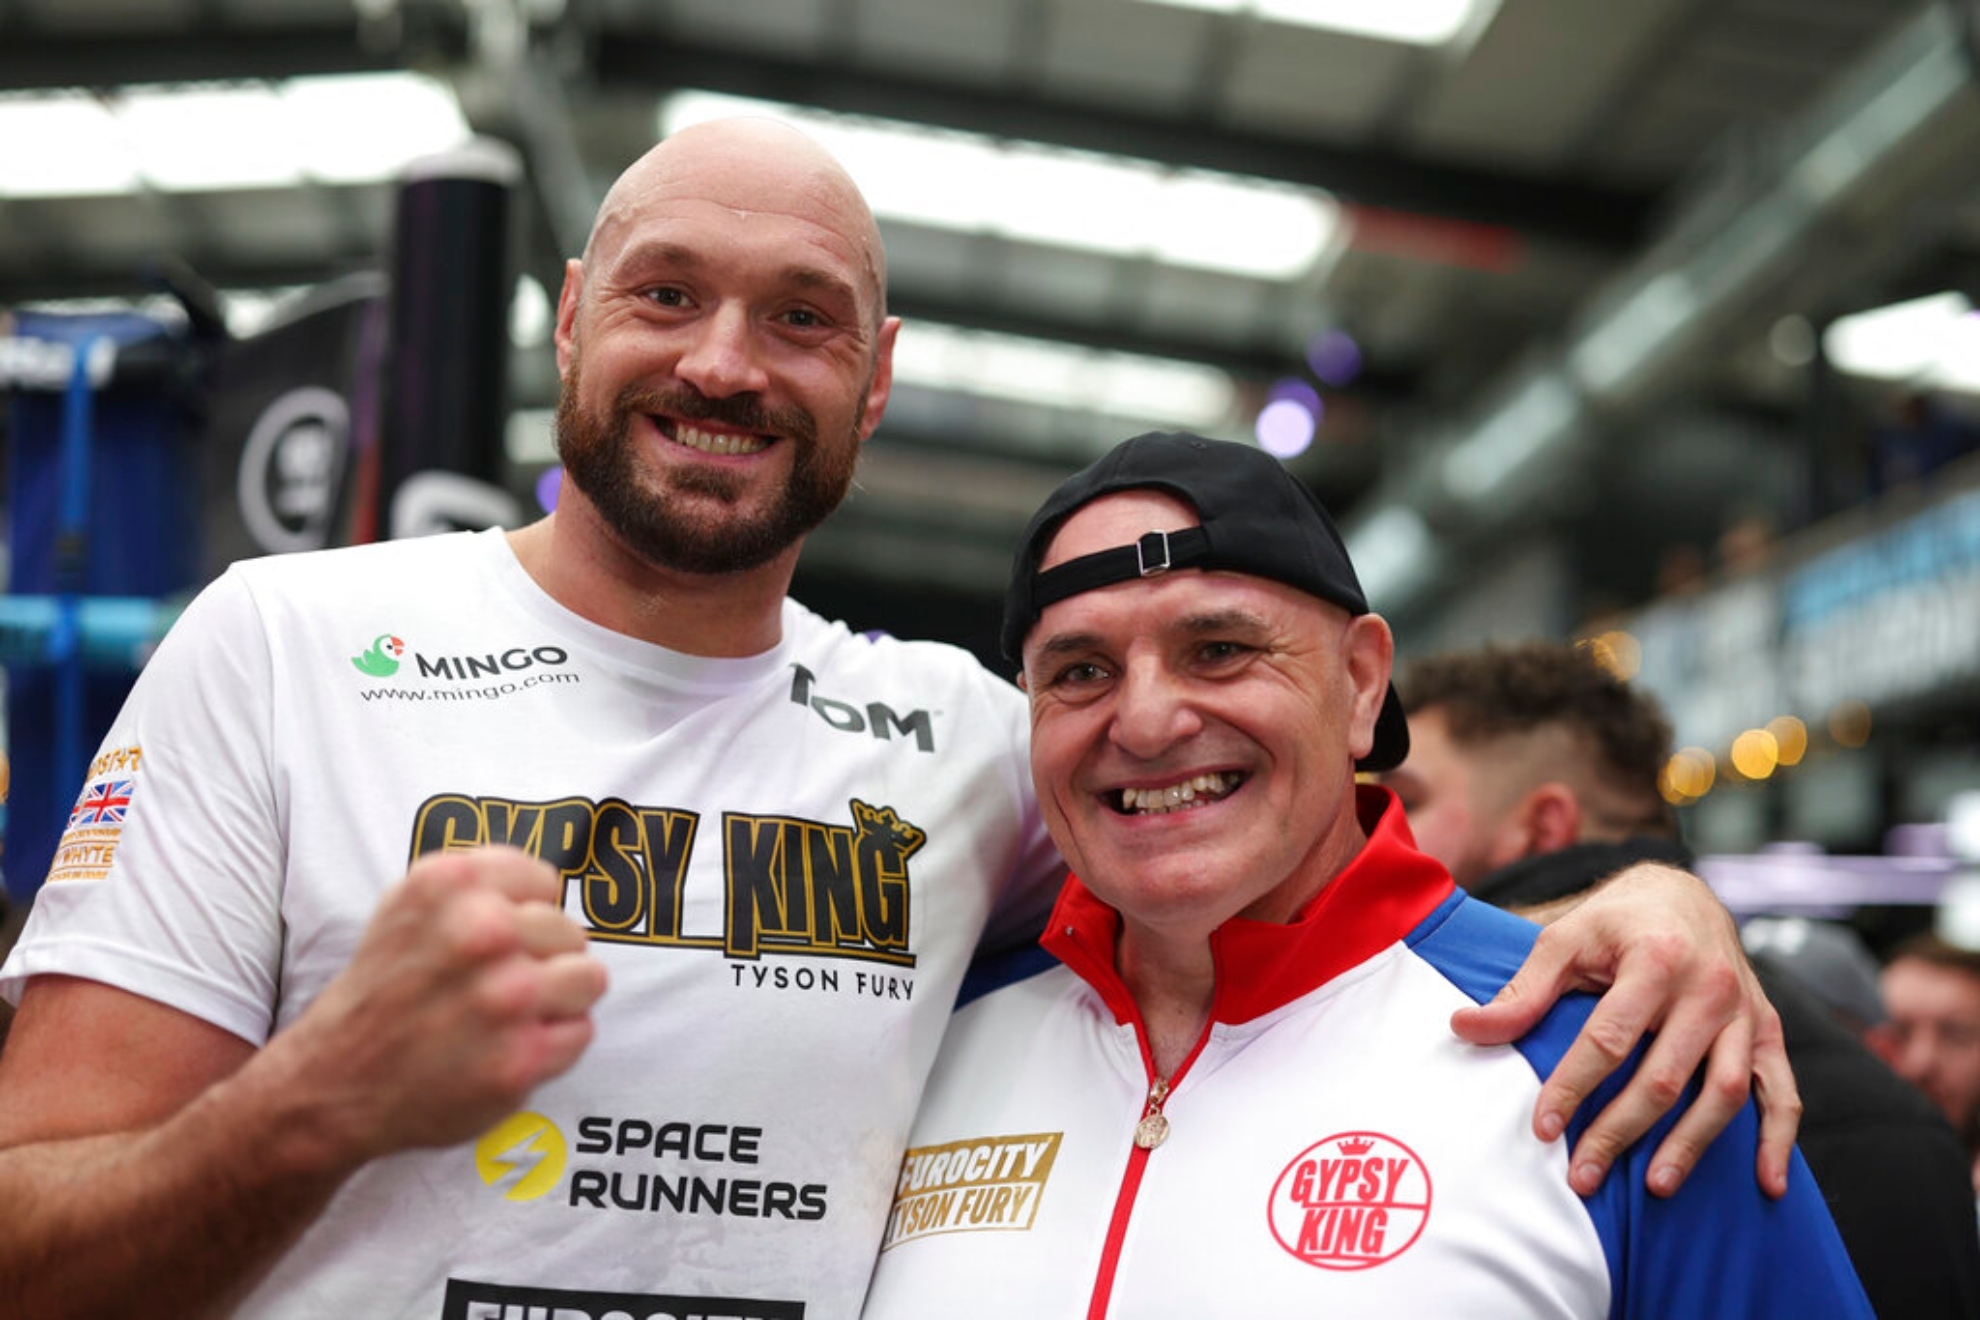 Tyson Furys dad John Fury urges the Gypsy Kings to change his style when facing Oleksandr Usyk